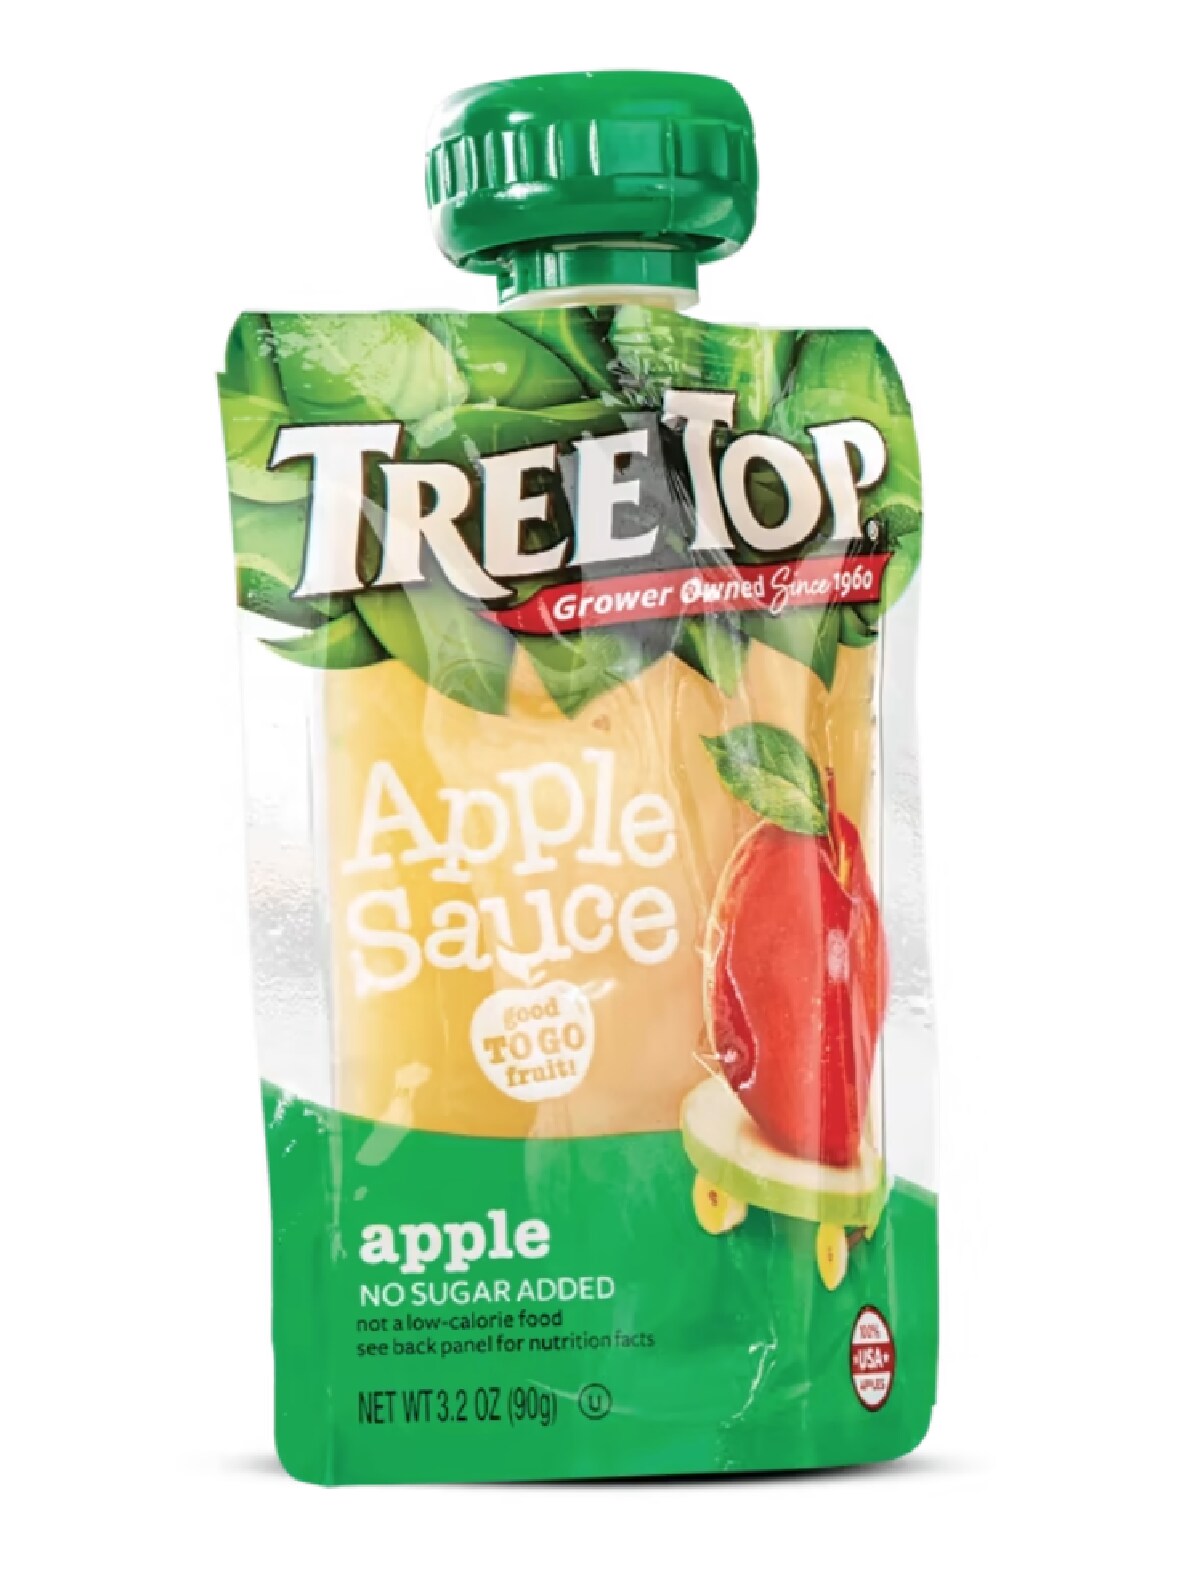 A green and red squeeze pouch of Treetop Applesauce against a white background.